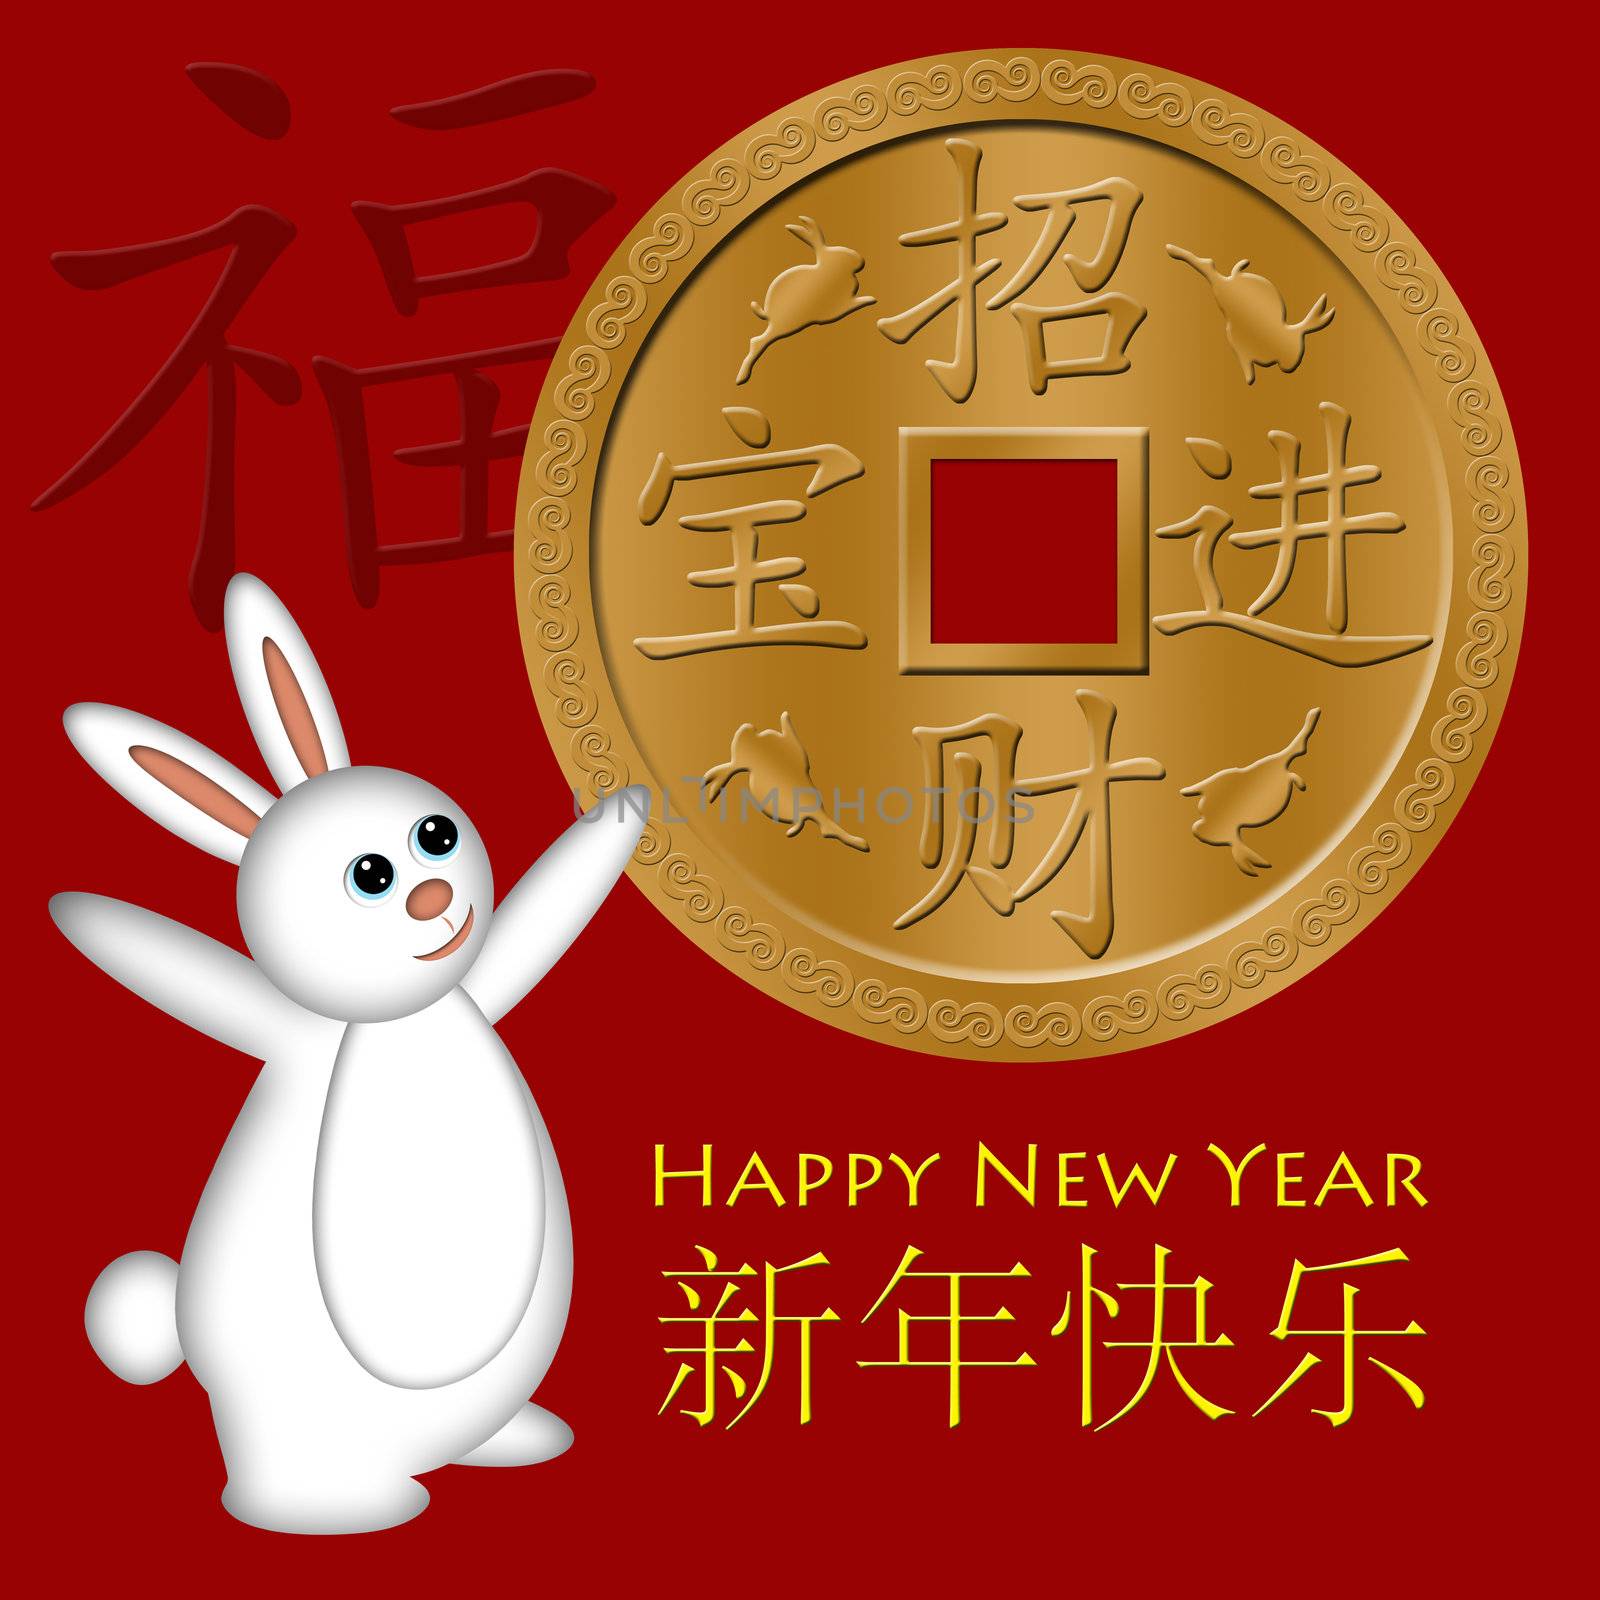 Rabbit Welcoming the Chinese New Year with Gold Coin by Davidgn